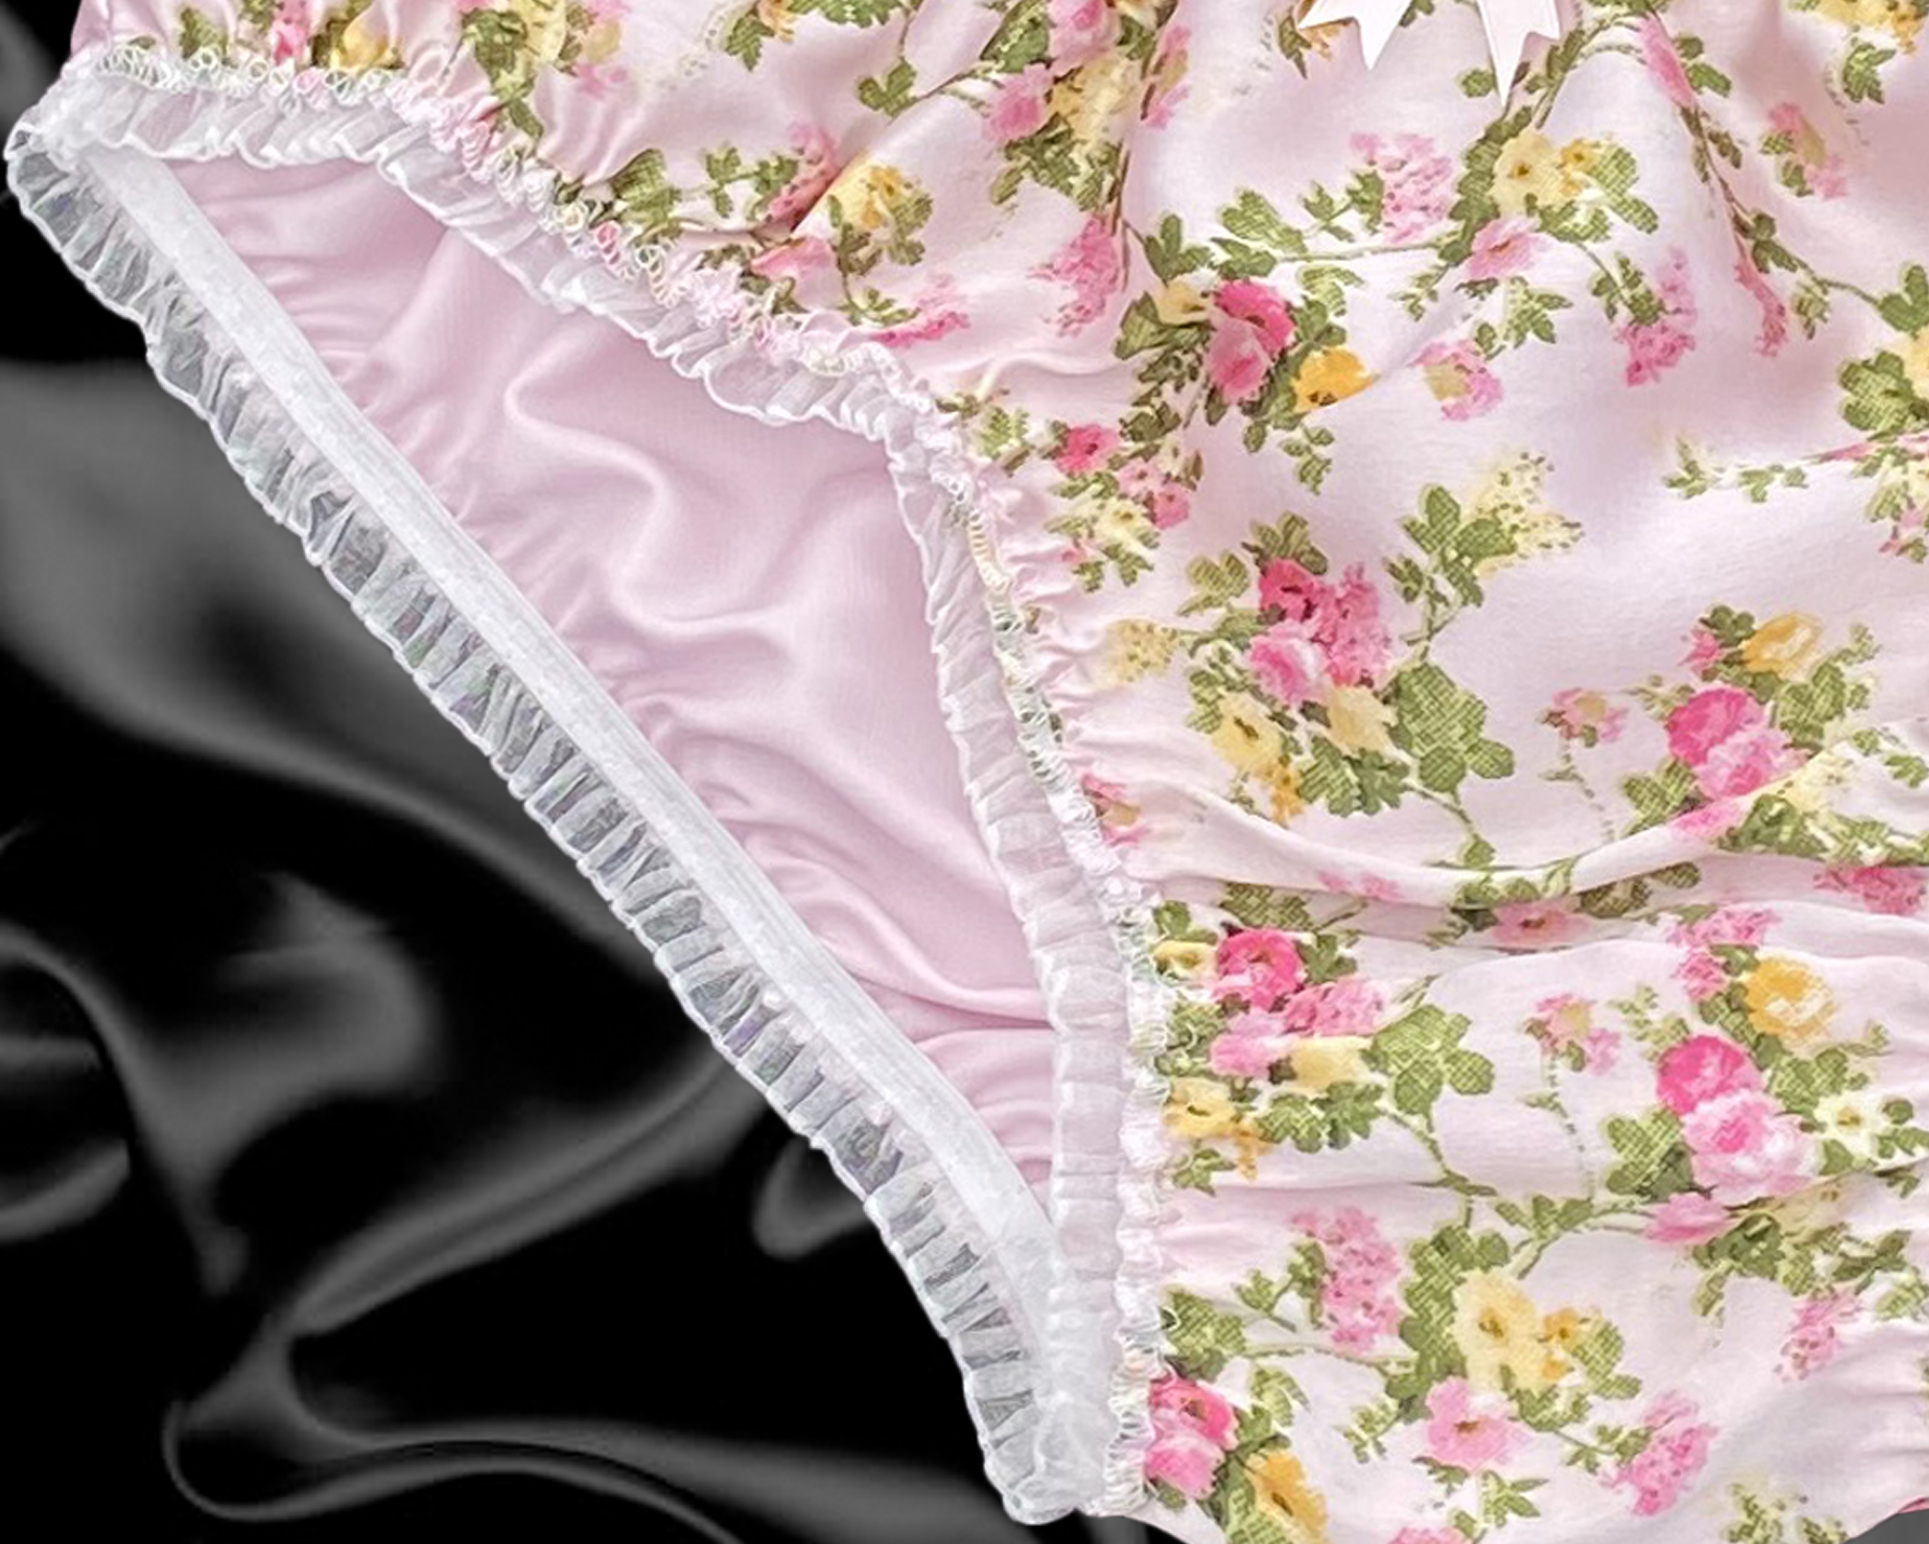 White Pink Satin Frilly Lace Sissy Full Cut Panties Briefs Knicker